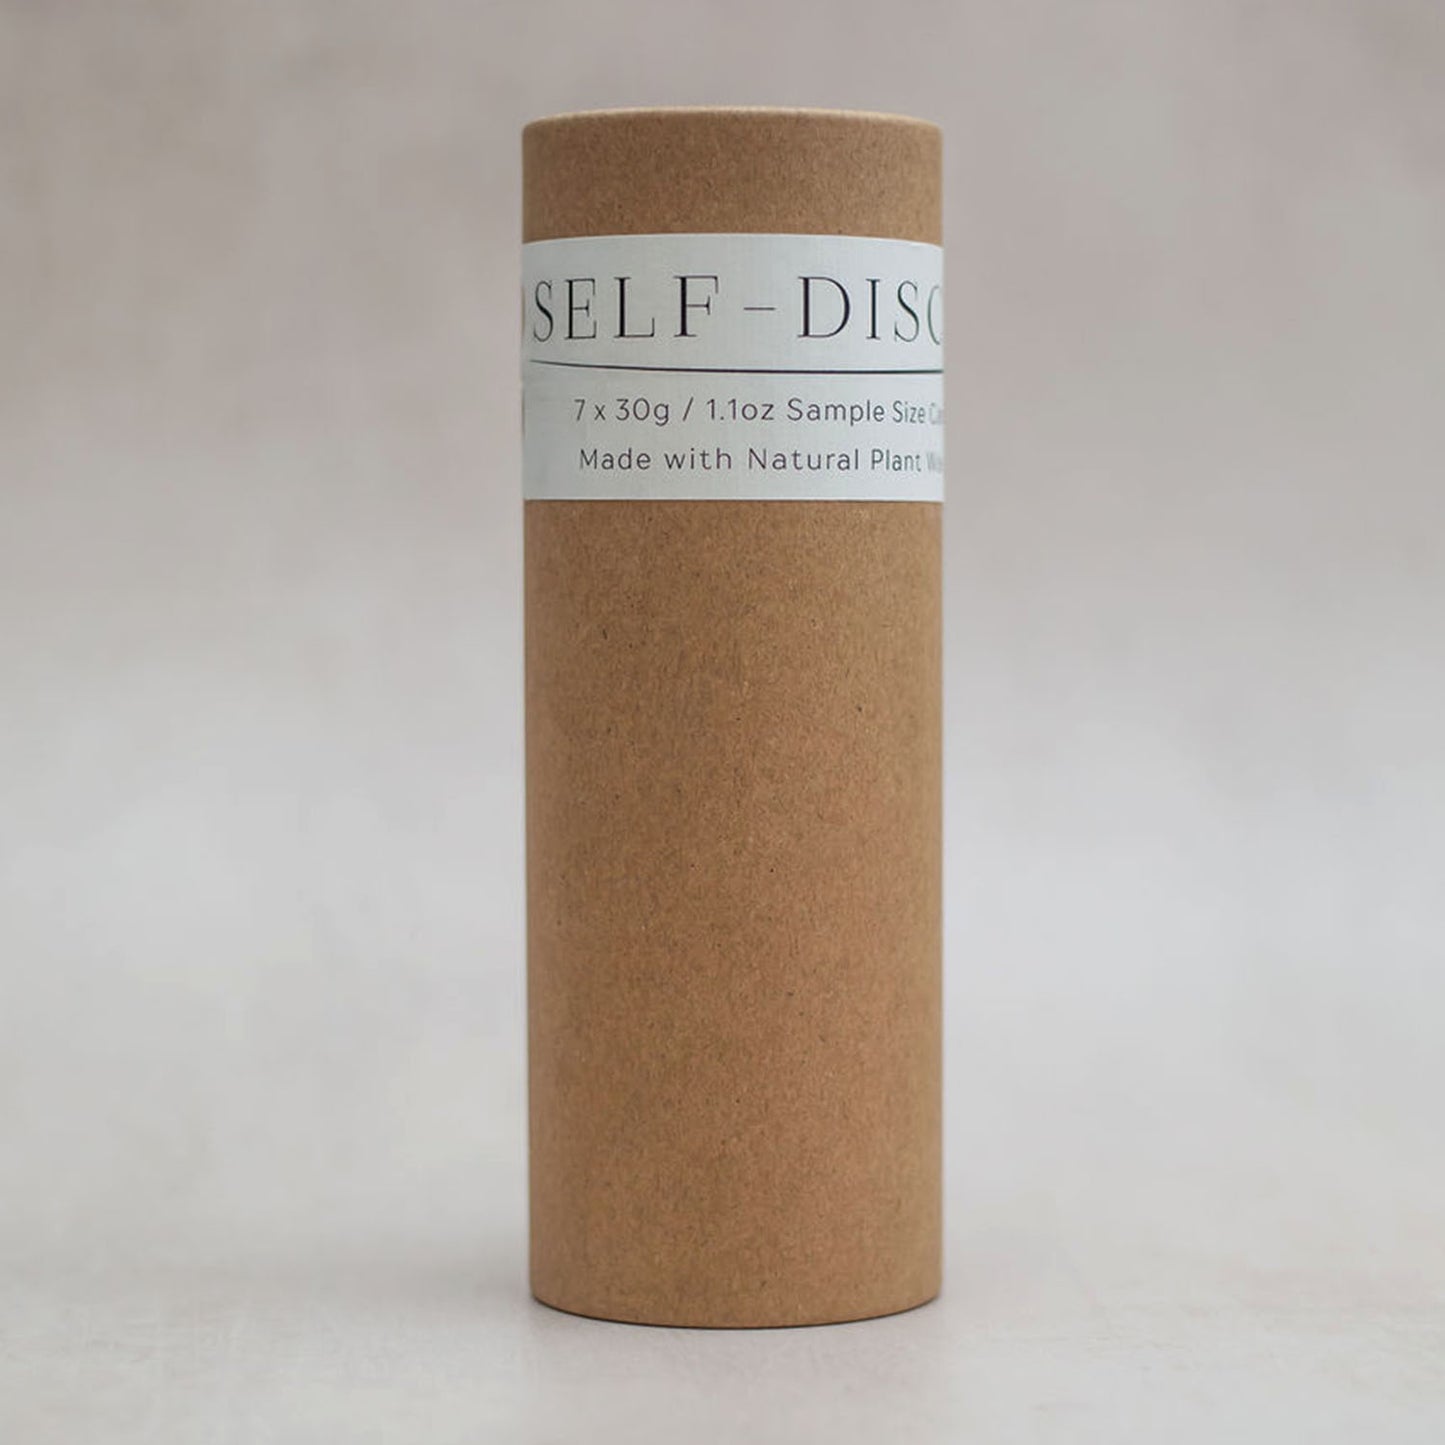 Self-Discovery Candle Sampler